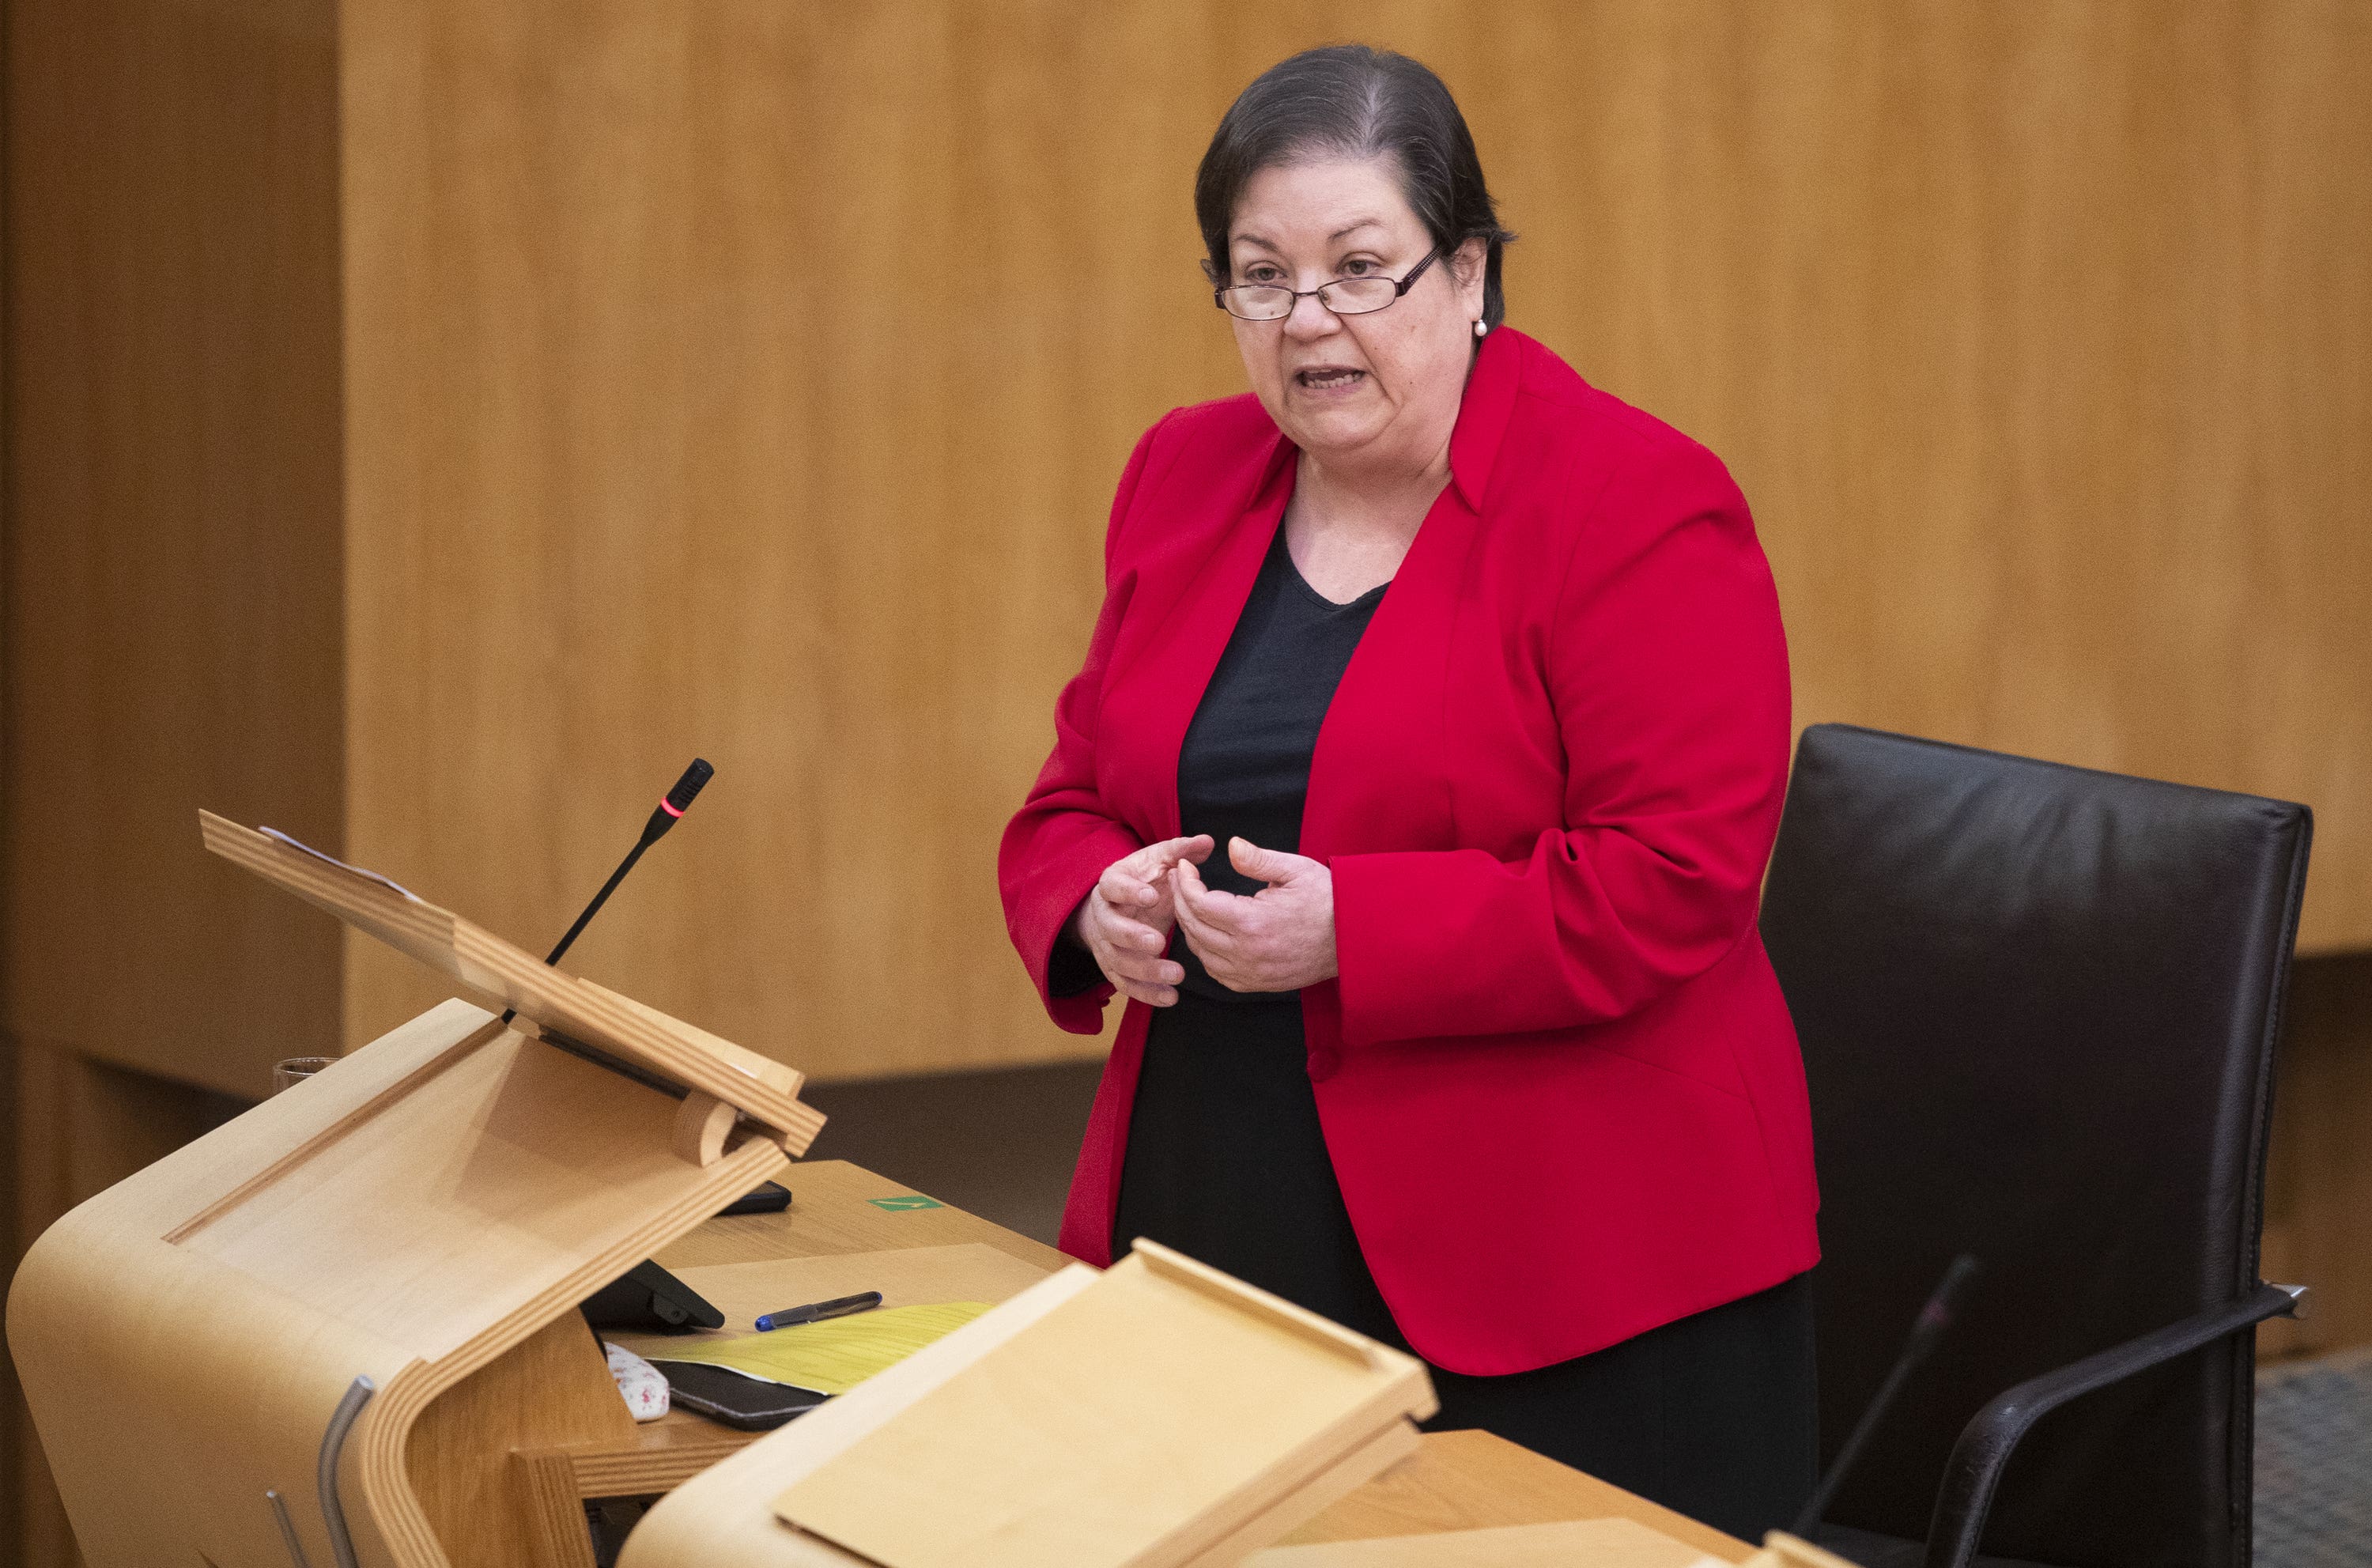 Scottish Labour health spokeswoman Jackie Baillie said the country was facing a ‘health care crisis’. (Jane Barlow/PA)